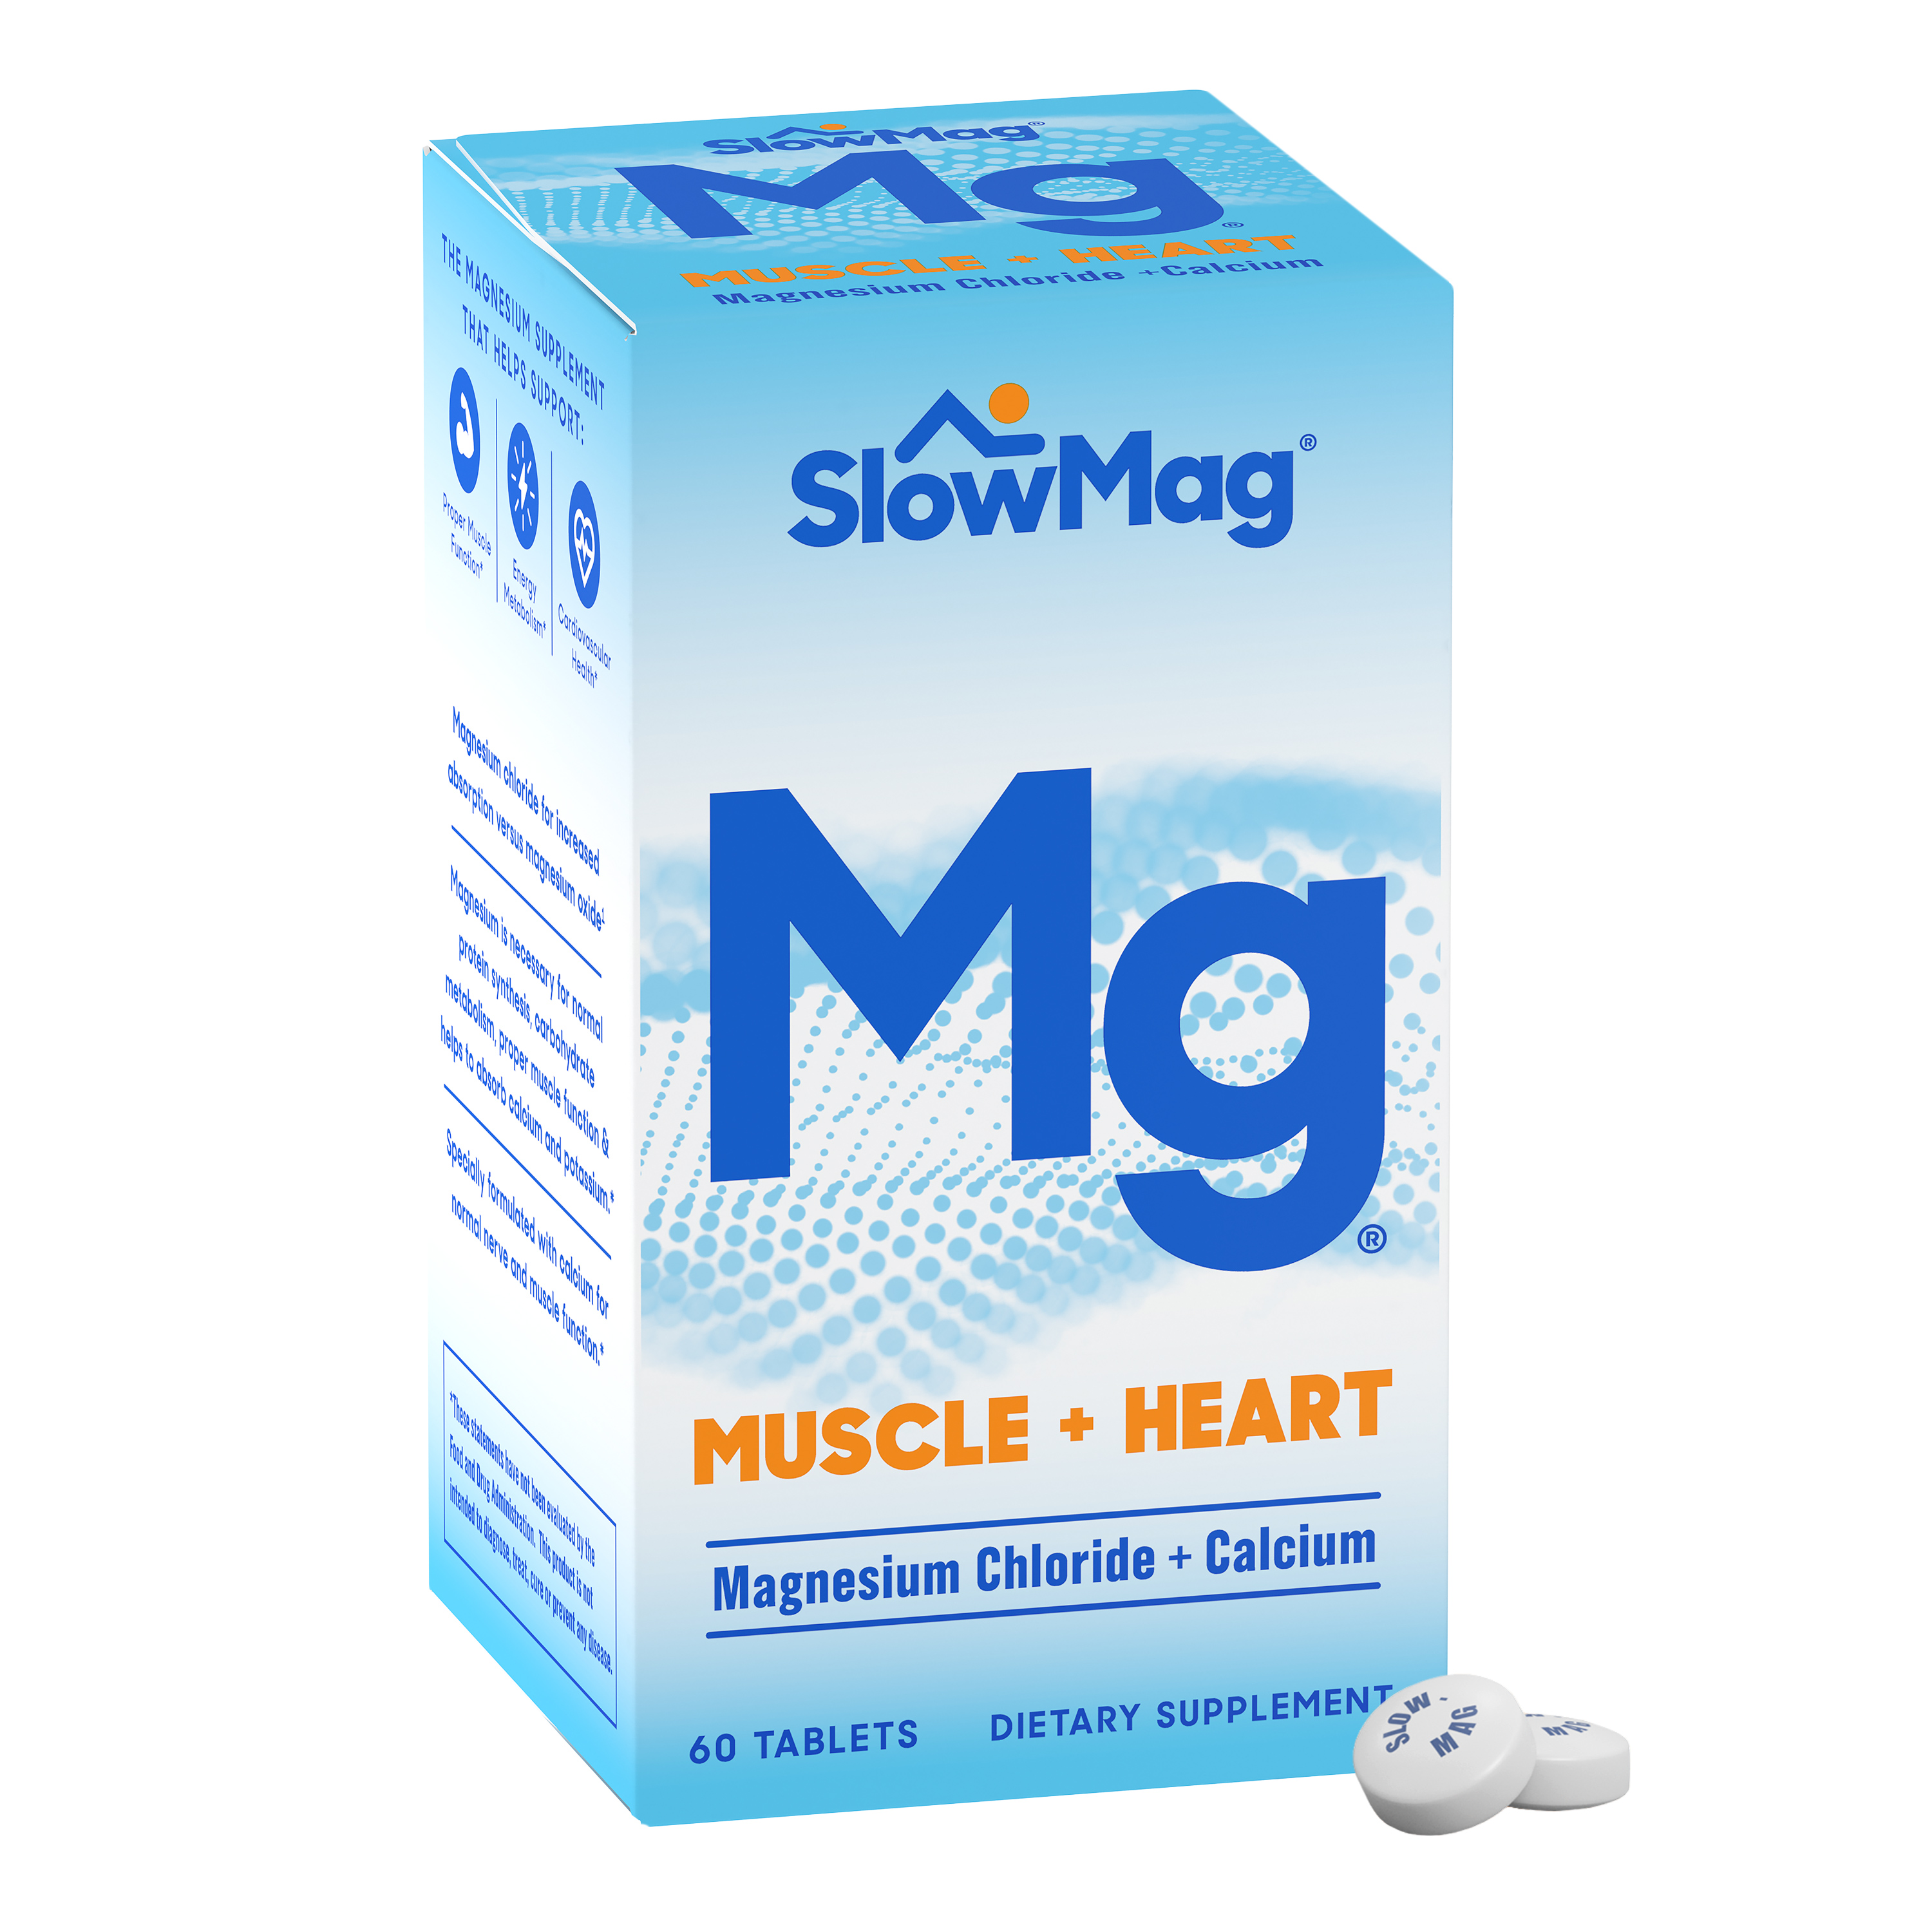 SlowMag® Mg Muscle + Heart Magnesium Chloride Supplement Tablets with Calcium 60ct - image 1 of 12